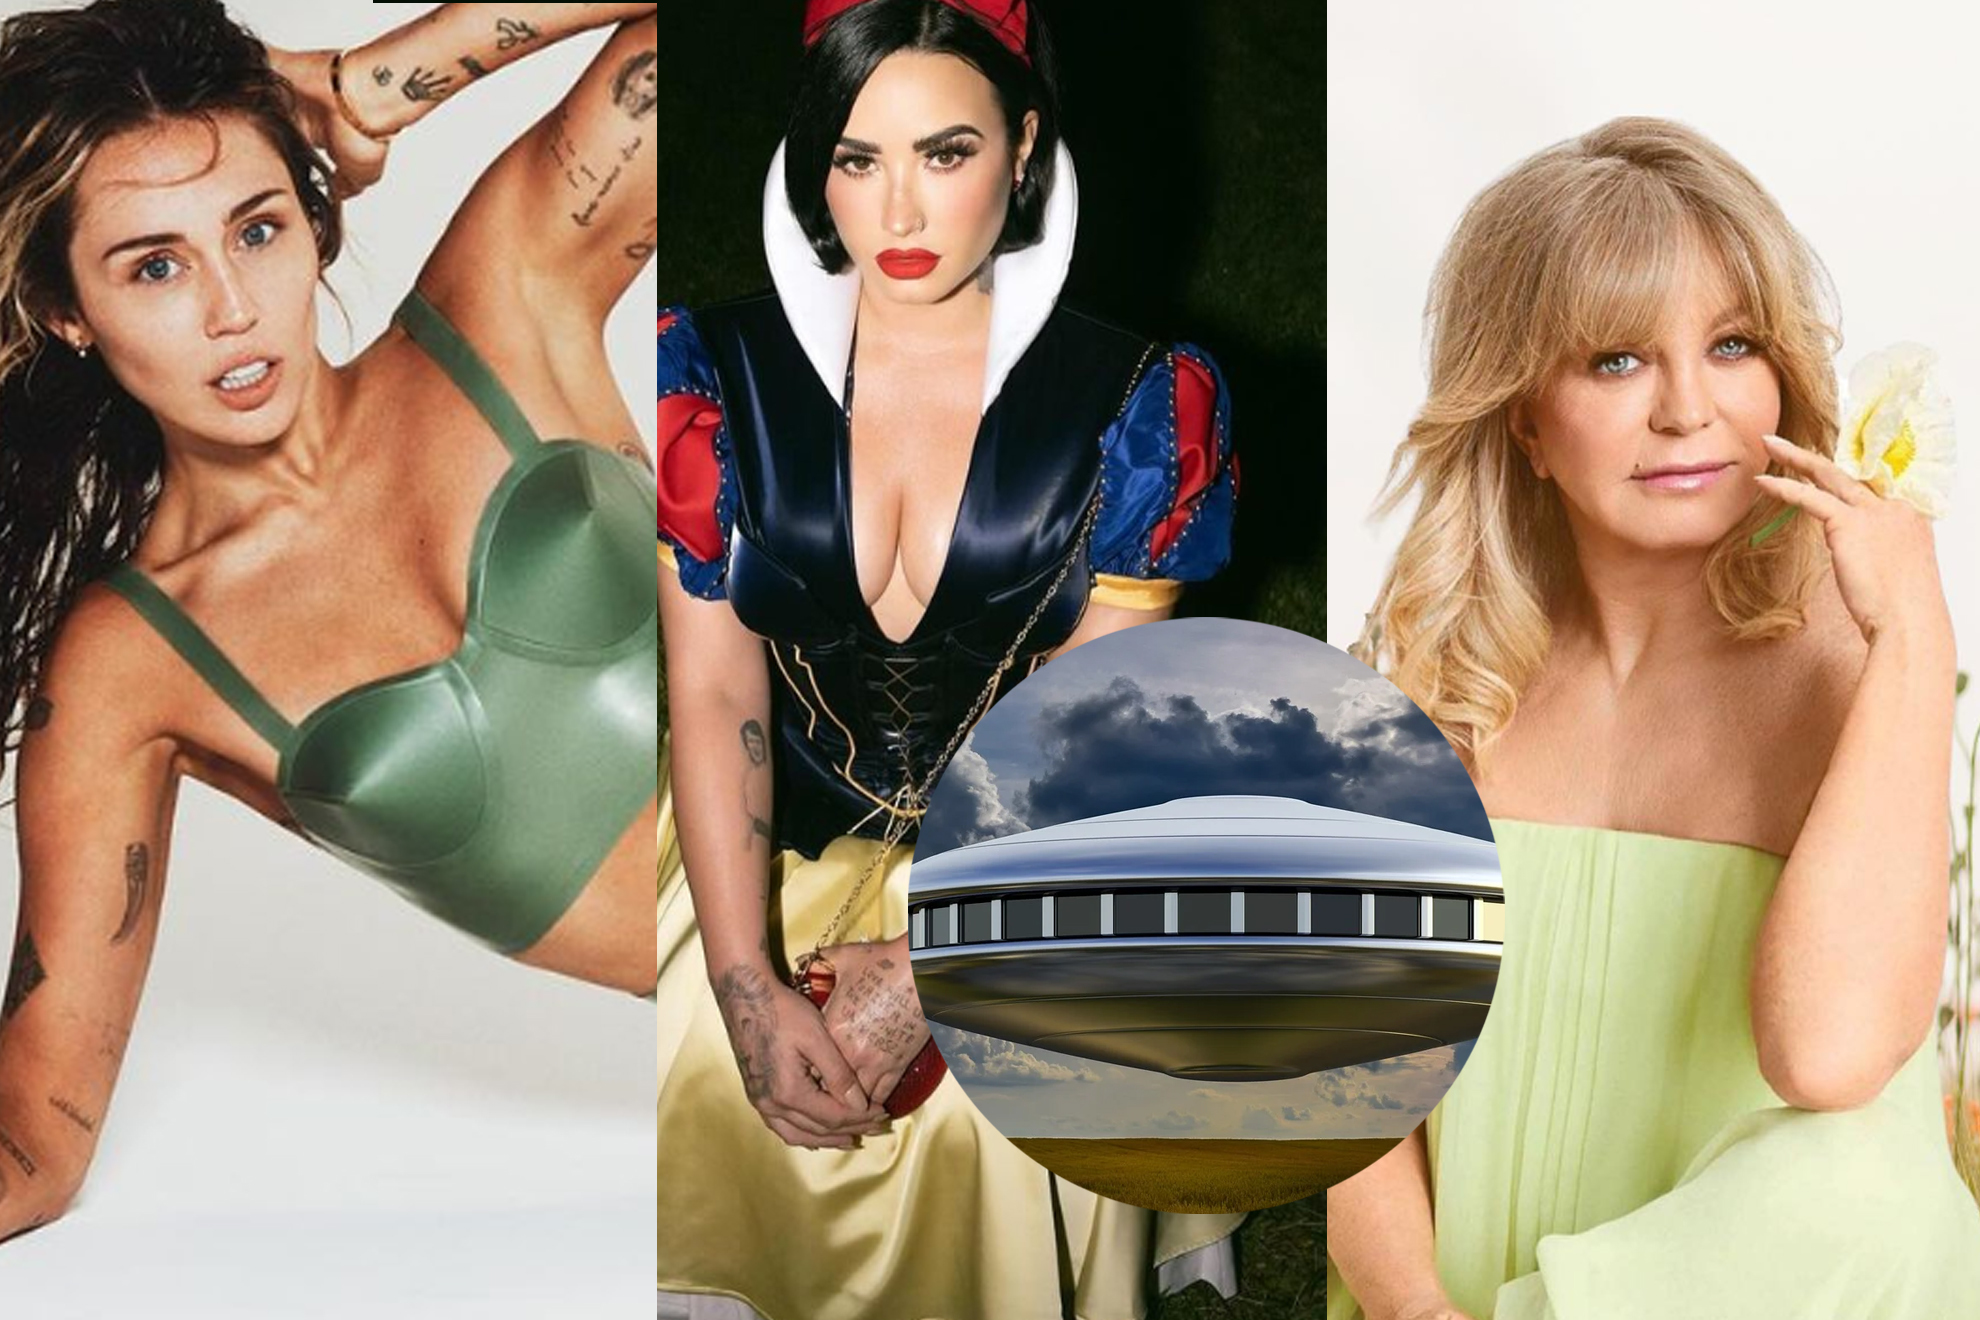 Miley Cyrus, Demi Lovato and Goldie Hawn's encounters with aliens: It glowed yellow